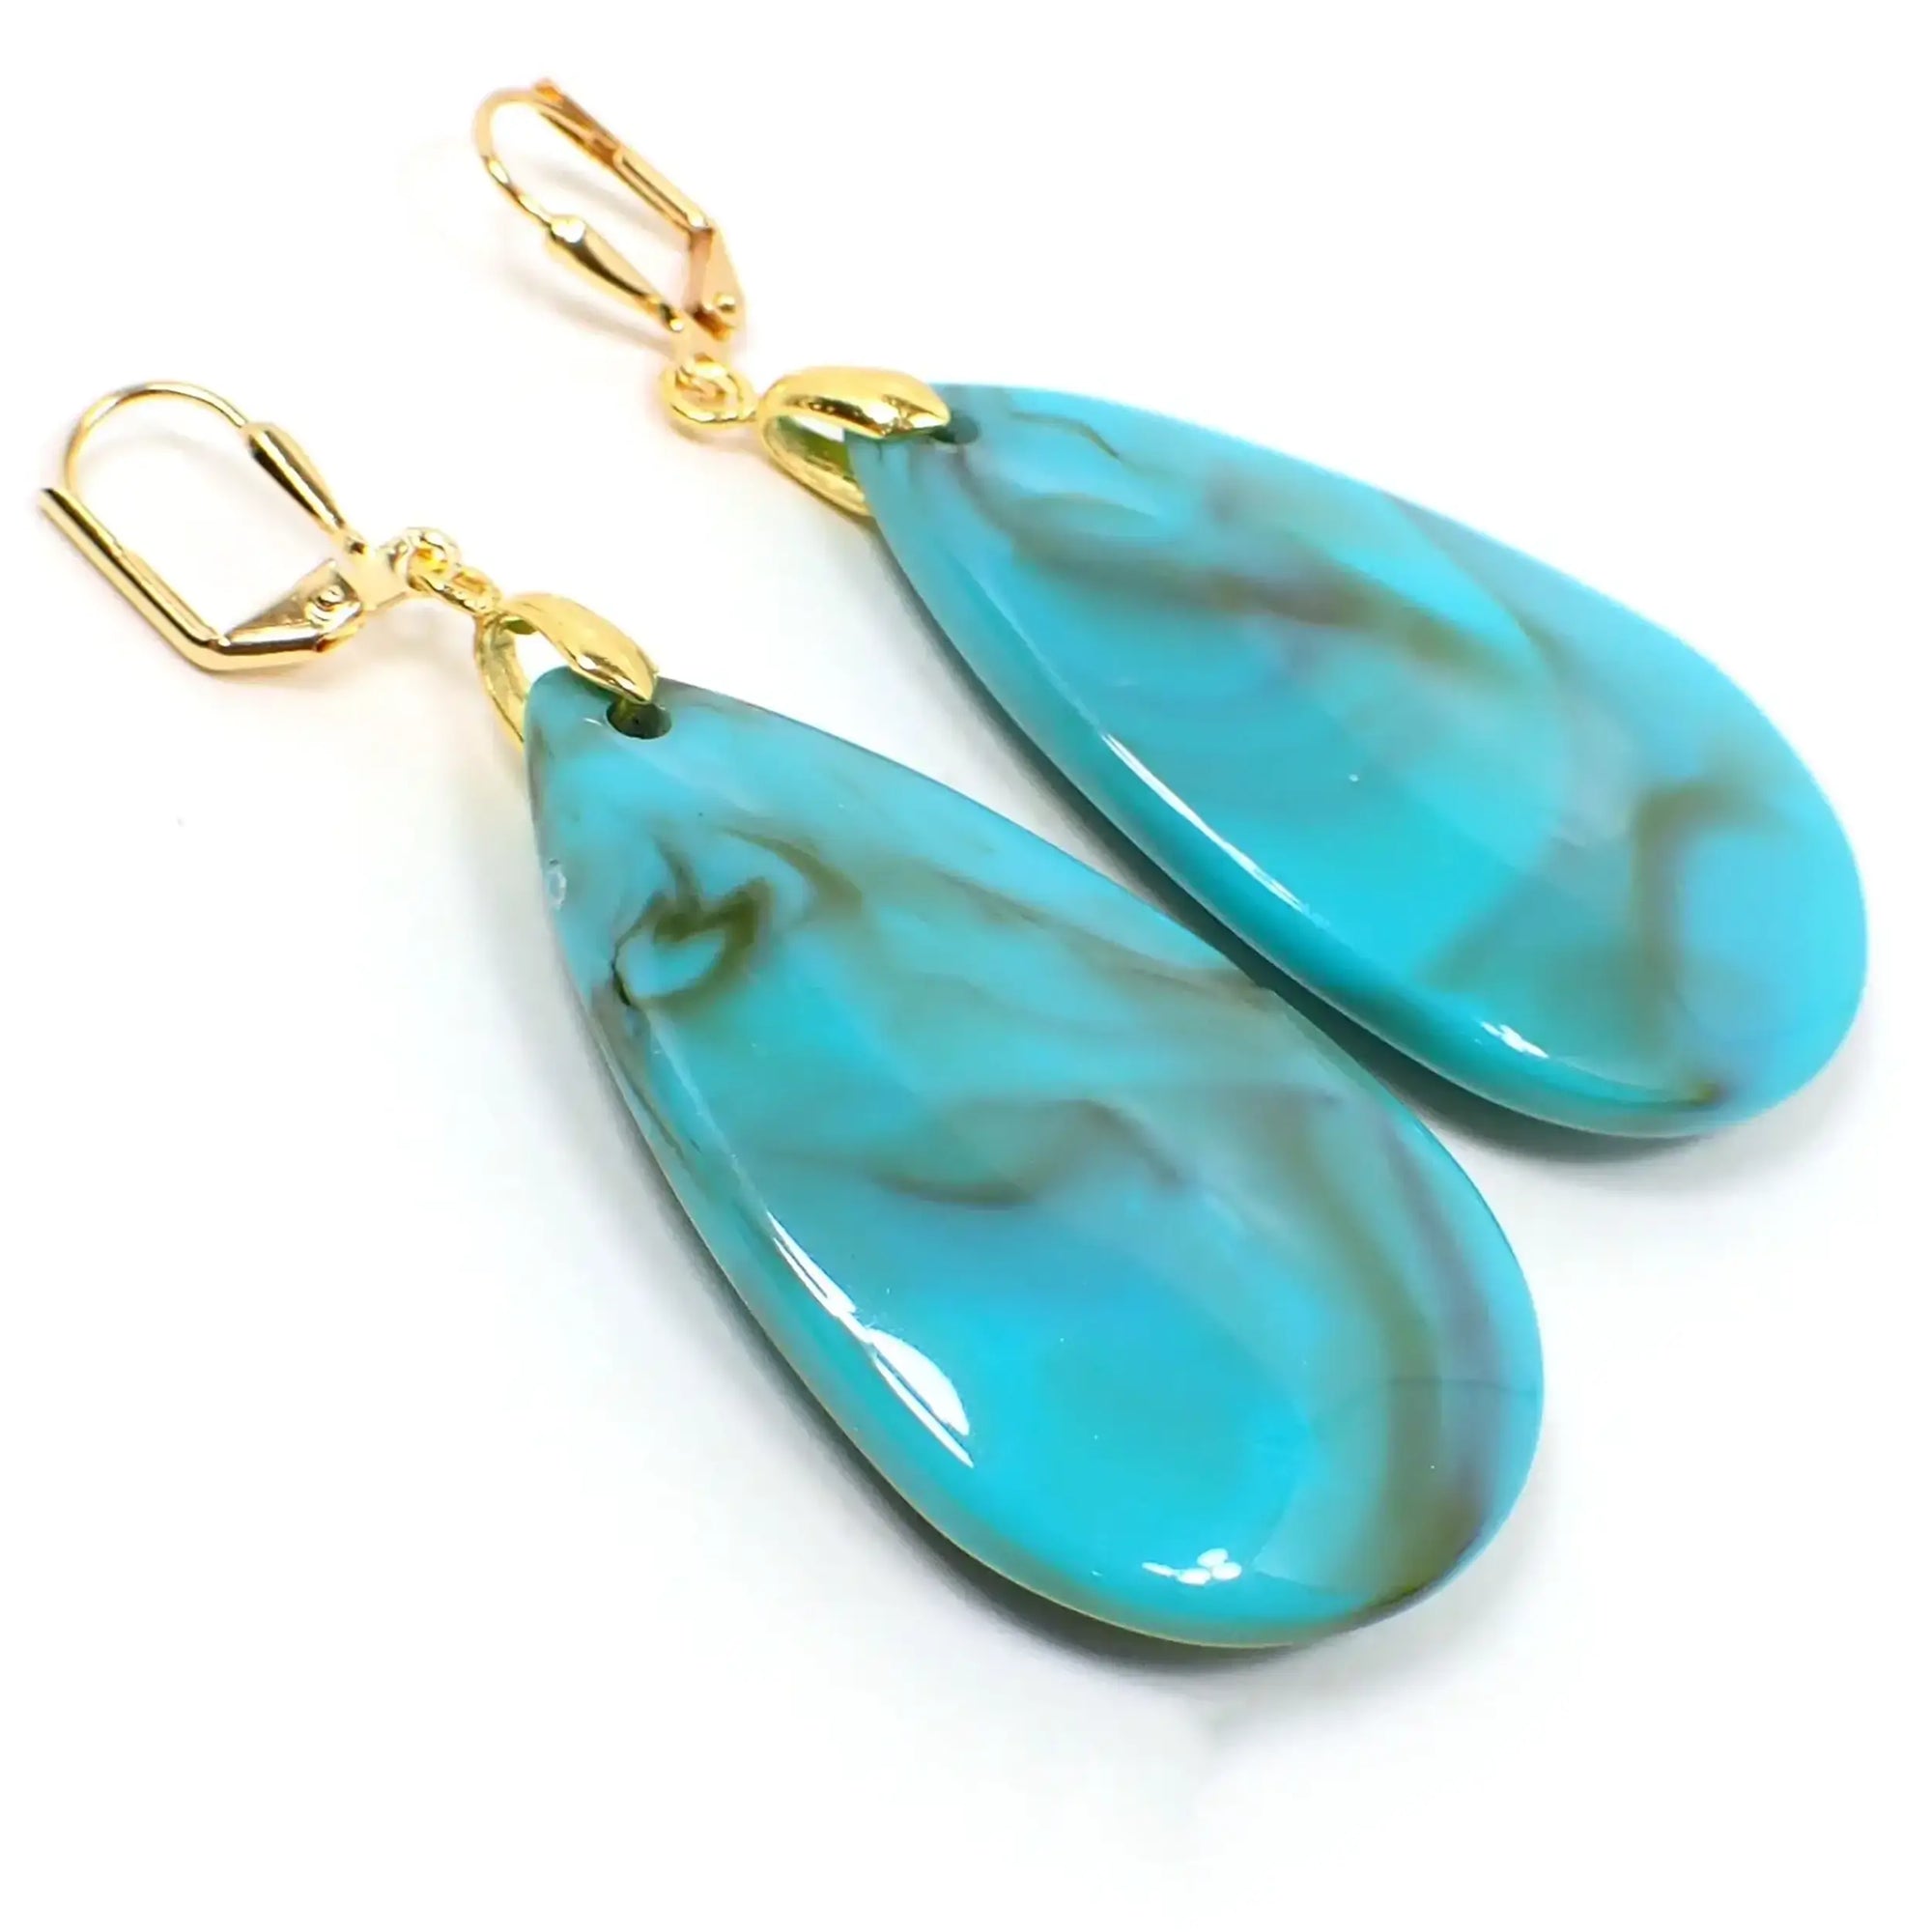 Angled view of the handmade big marbled acrylic teardrop earrings. The metal is gold tone plated in color. They are large puffy teardrop shaped and are mostly turquoise blue color with shades of brown swirled in.